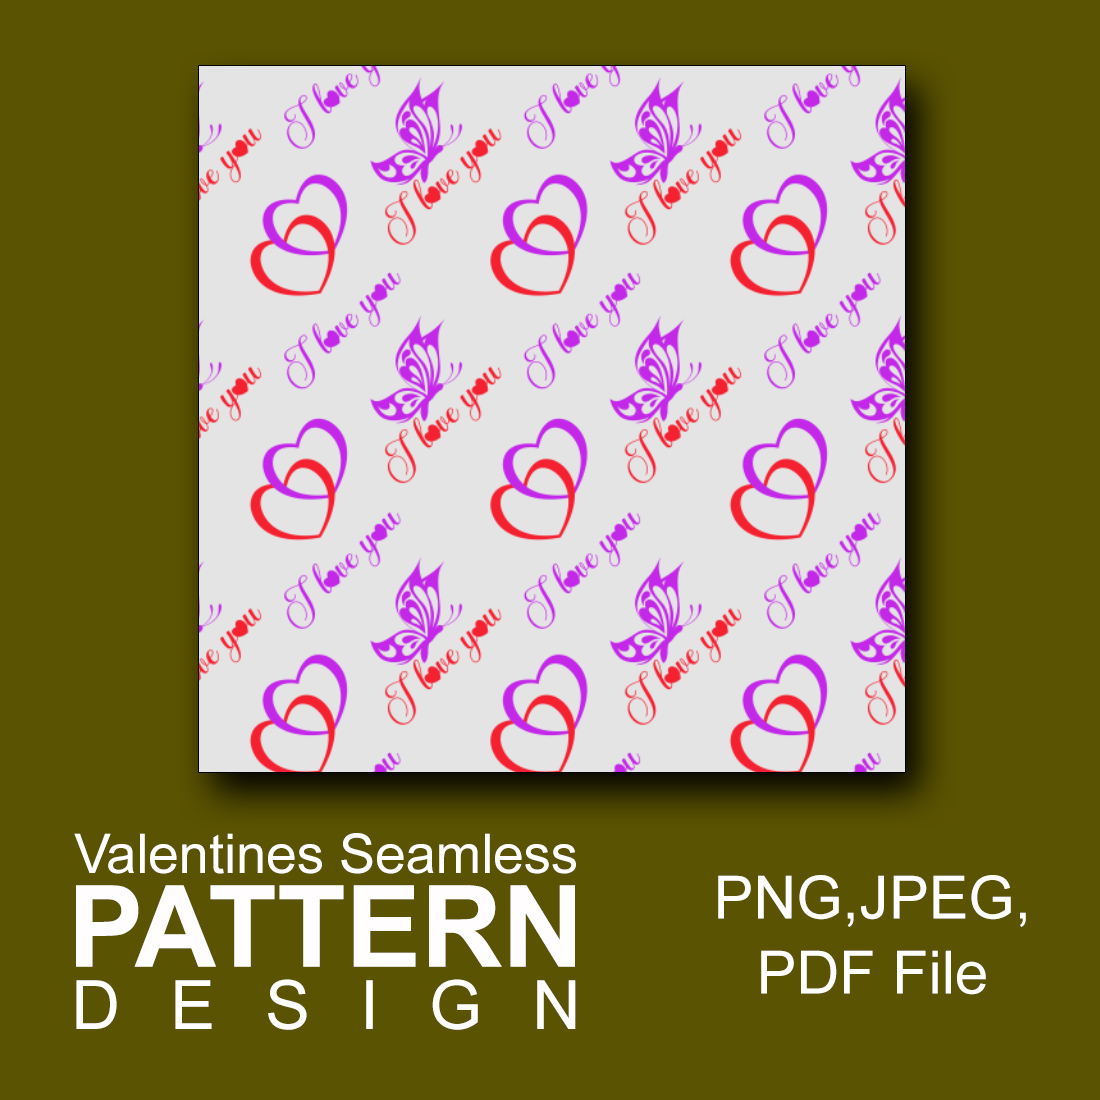 I Love You Valentines Butterfly Heart Seamless Pattern Design cover image.